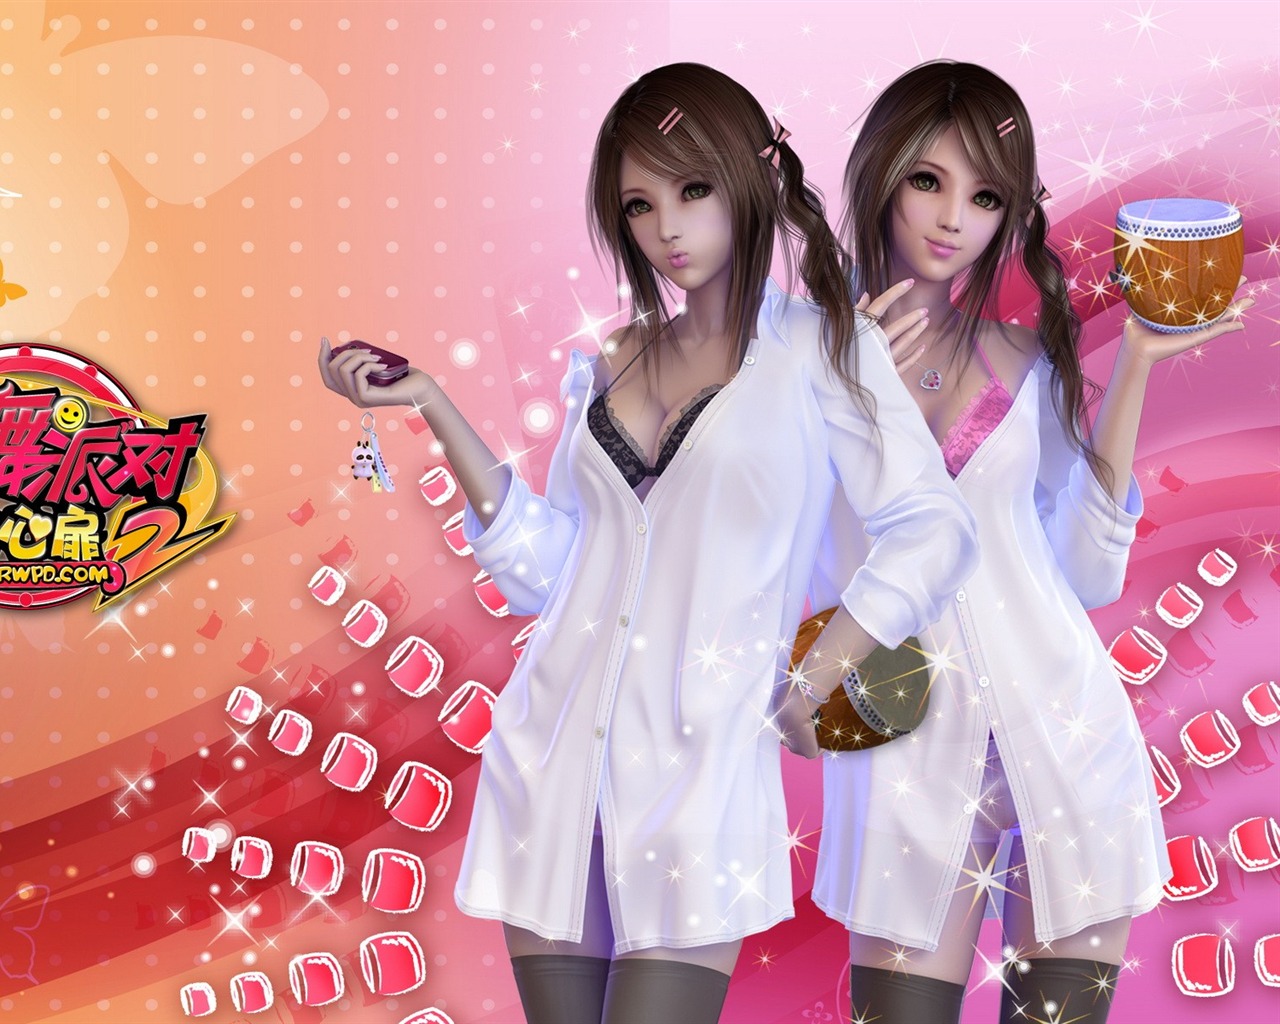 Online game Hot Dance Party II official wallpapers #12 - 1280x1024